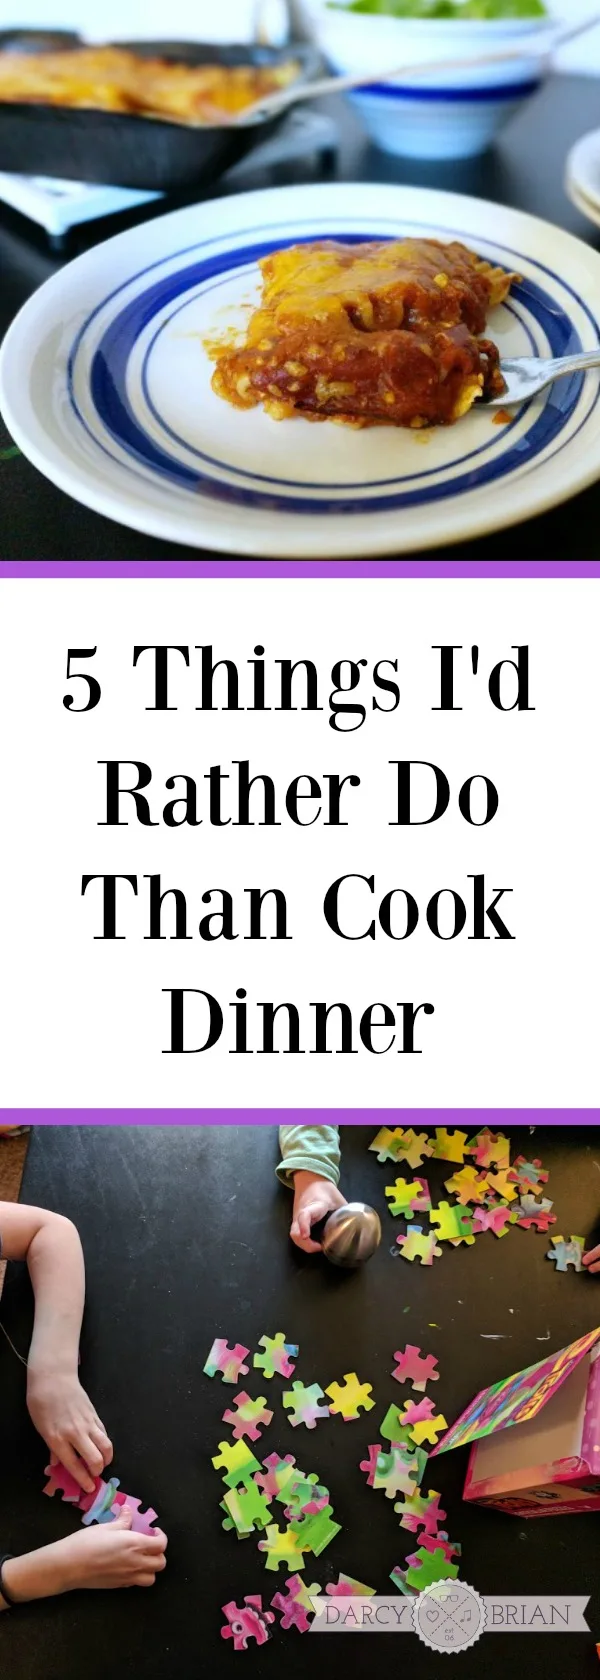 [AD] Some days are too busy to spend a lot of time in the kitchen cooking dinner. Here are 5 Things I'd Rather Do Than Cook Dinner plus an easy meal solution when you have one of those crazy busy nights. #CountOnCor #OvenTimeTips